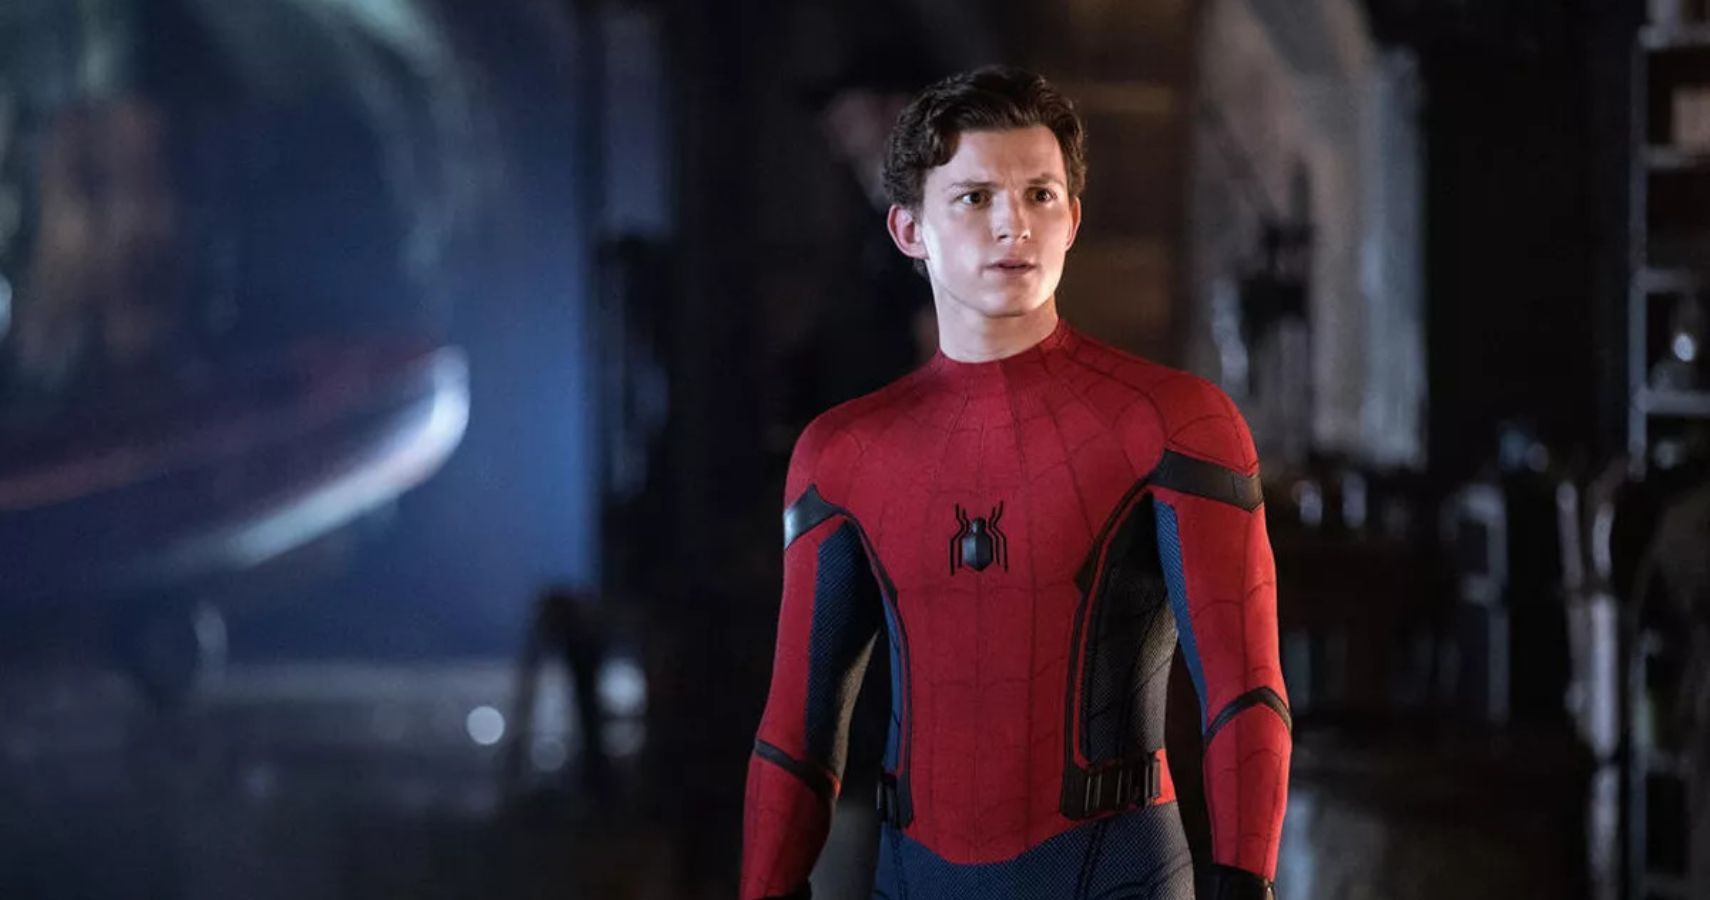 Spider-Man: No Way Home Wraps Filming, New Set Photo Revealed